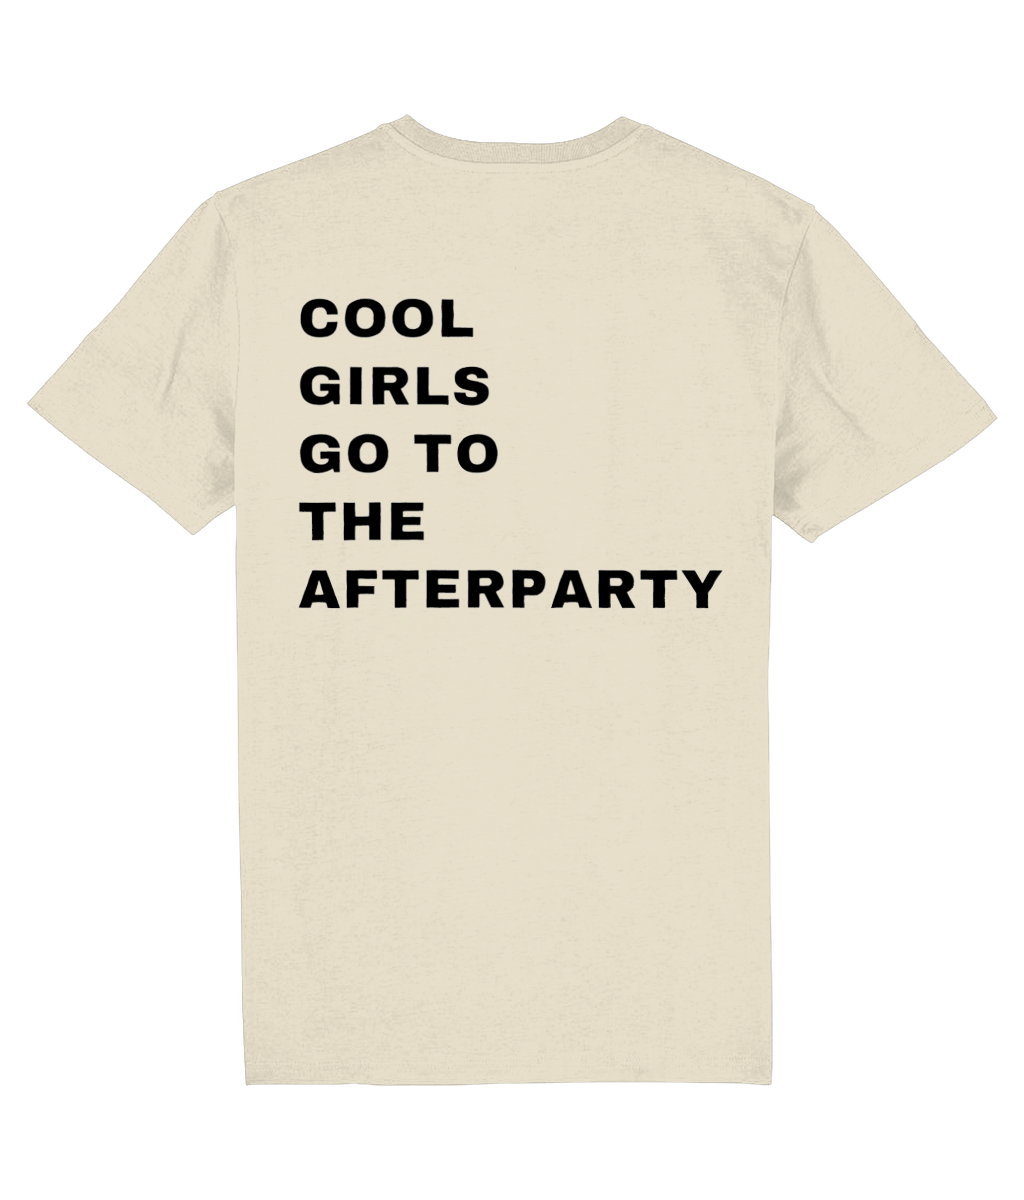 COOL GIRLS GO TO THE AFTERPARTY SHIRT